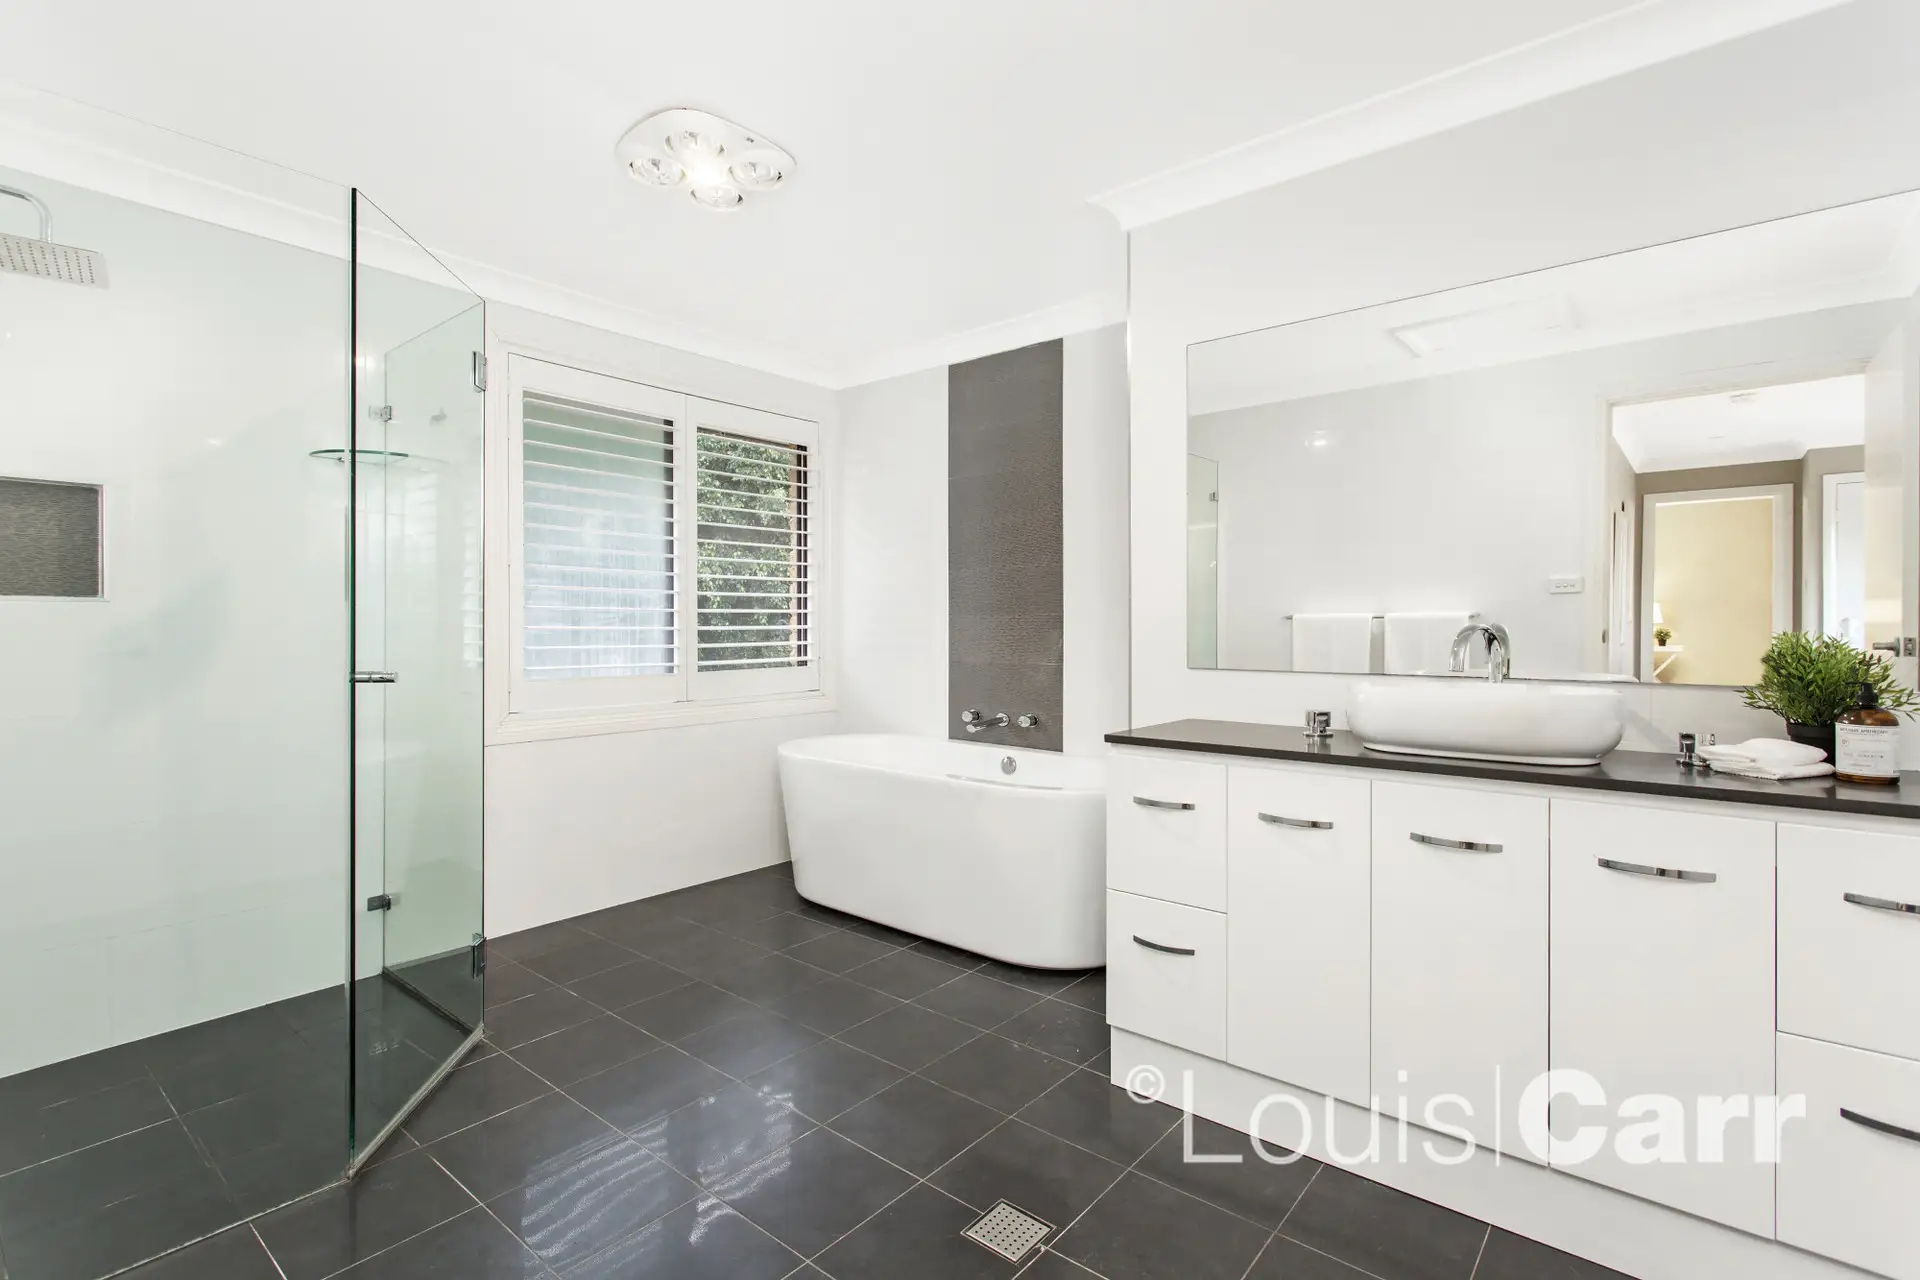 Photo #6: 13 Sanctuary Point Road, West Pennant Hills - Sold by Louis Carr Real Estate